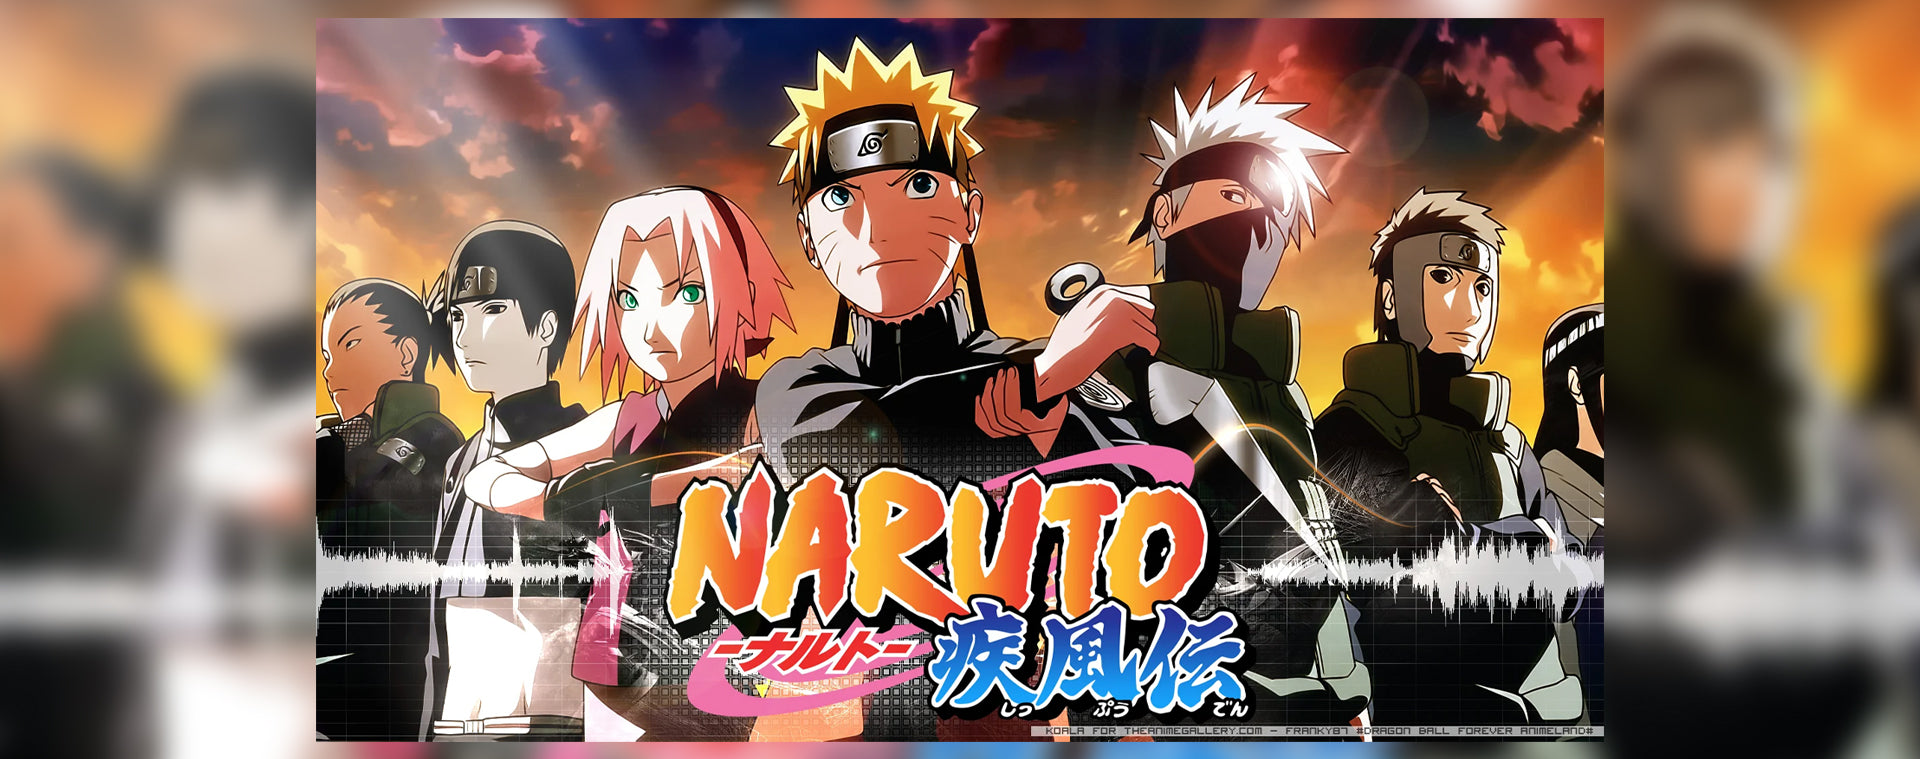 Naruto Is Finally Ending And Hopefully The Fandom Wars Too